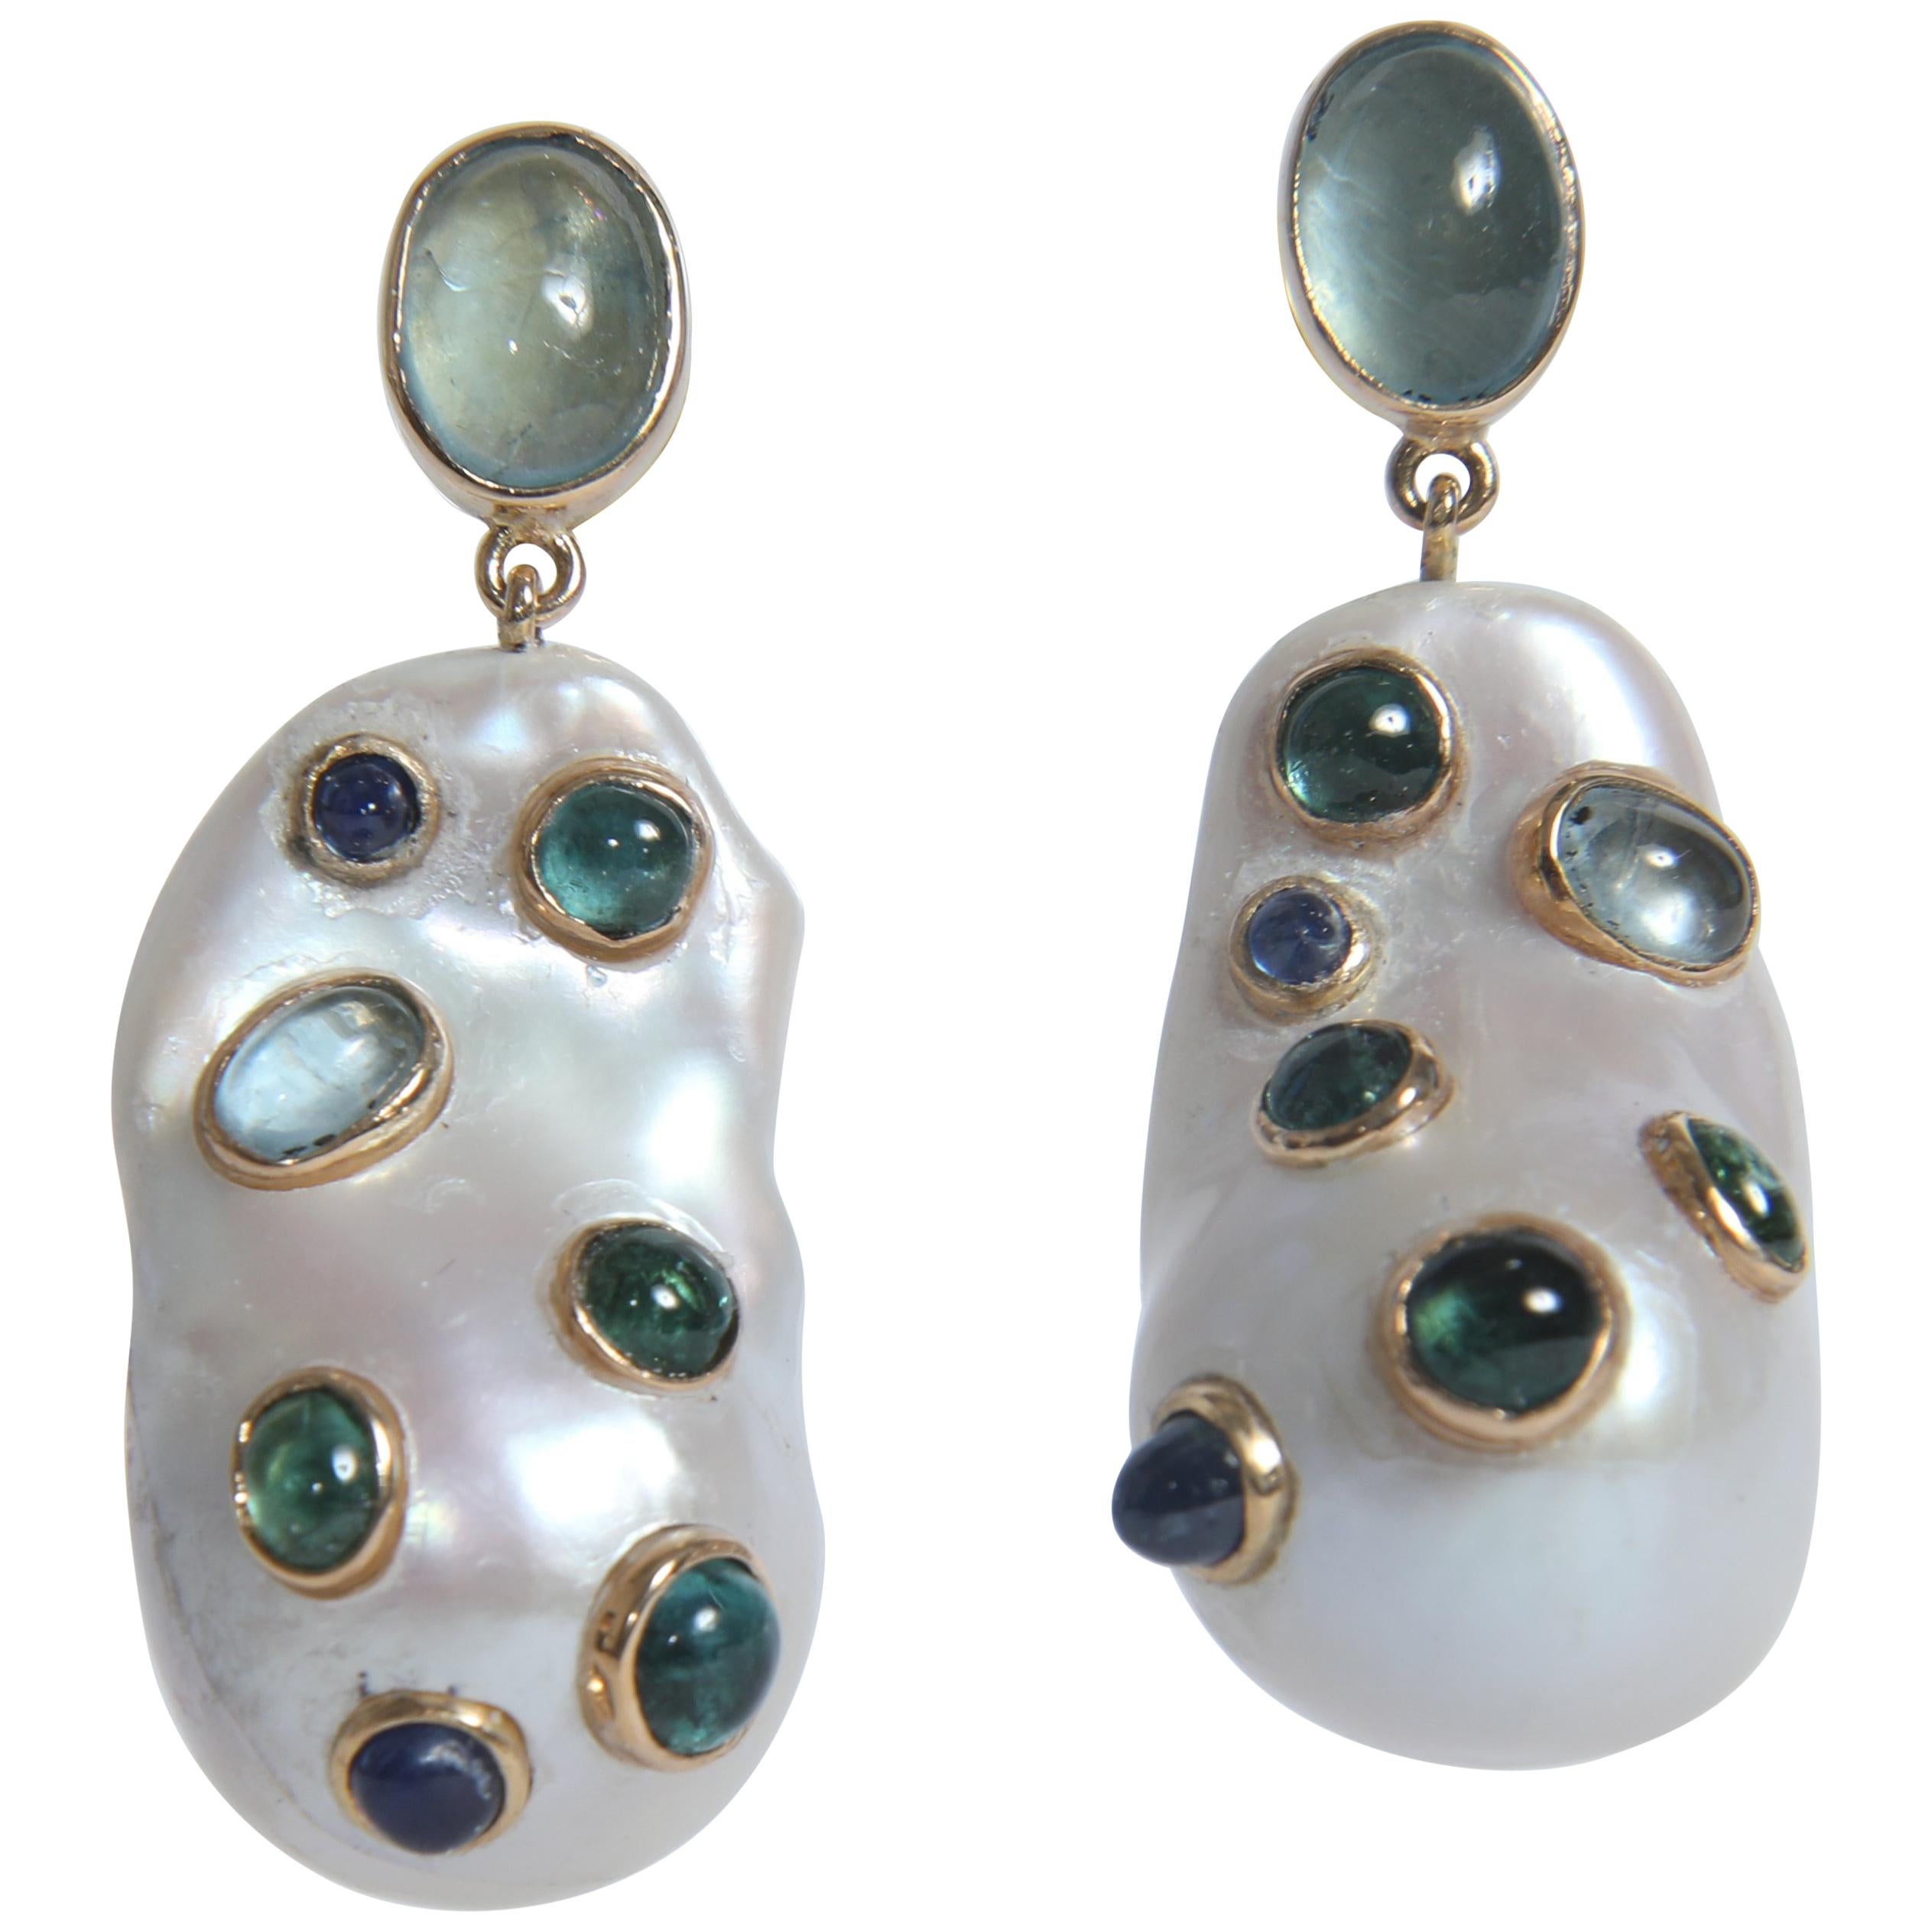 Baroque Pearls Earrings Set with Aquamarine, Sapphires, Green Tourmalines